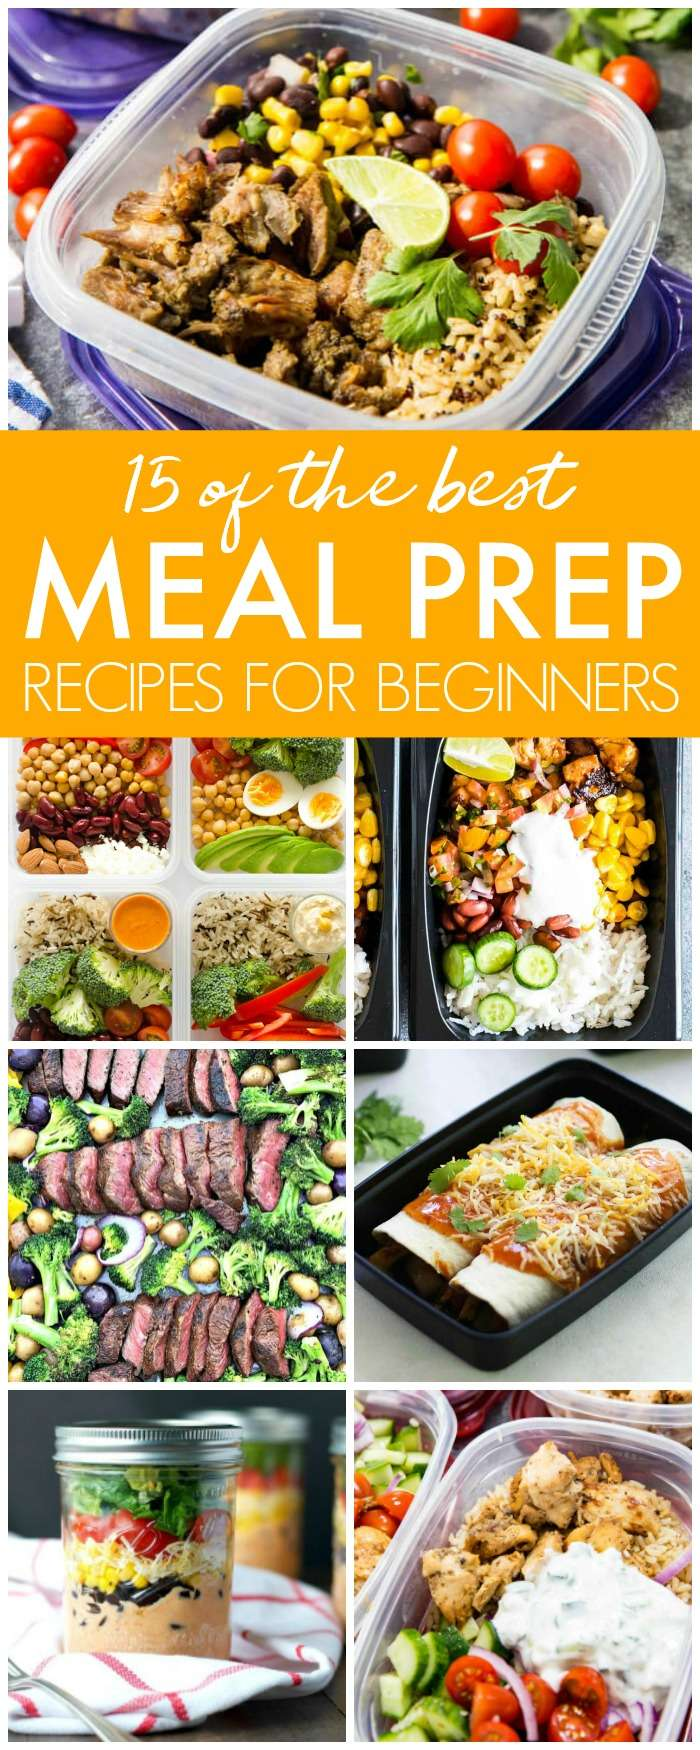 15 of the Best Meal Prep Recipes - Passion For Savings - 15 of the Best Meal Prep Recipes - Passion For Savings -   19 meal prep recipes for beginners simple ideas